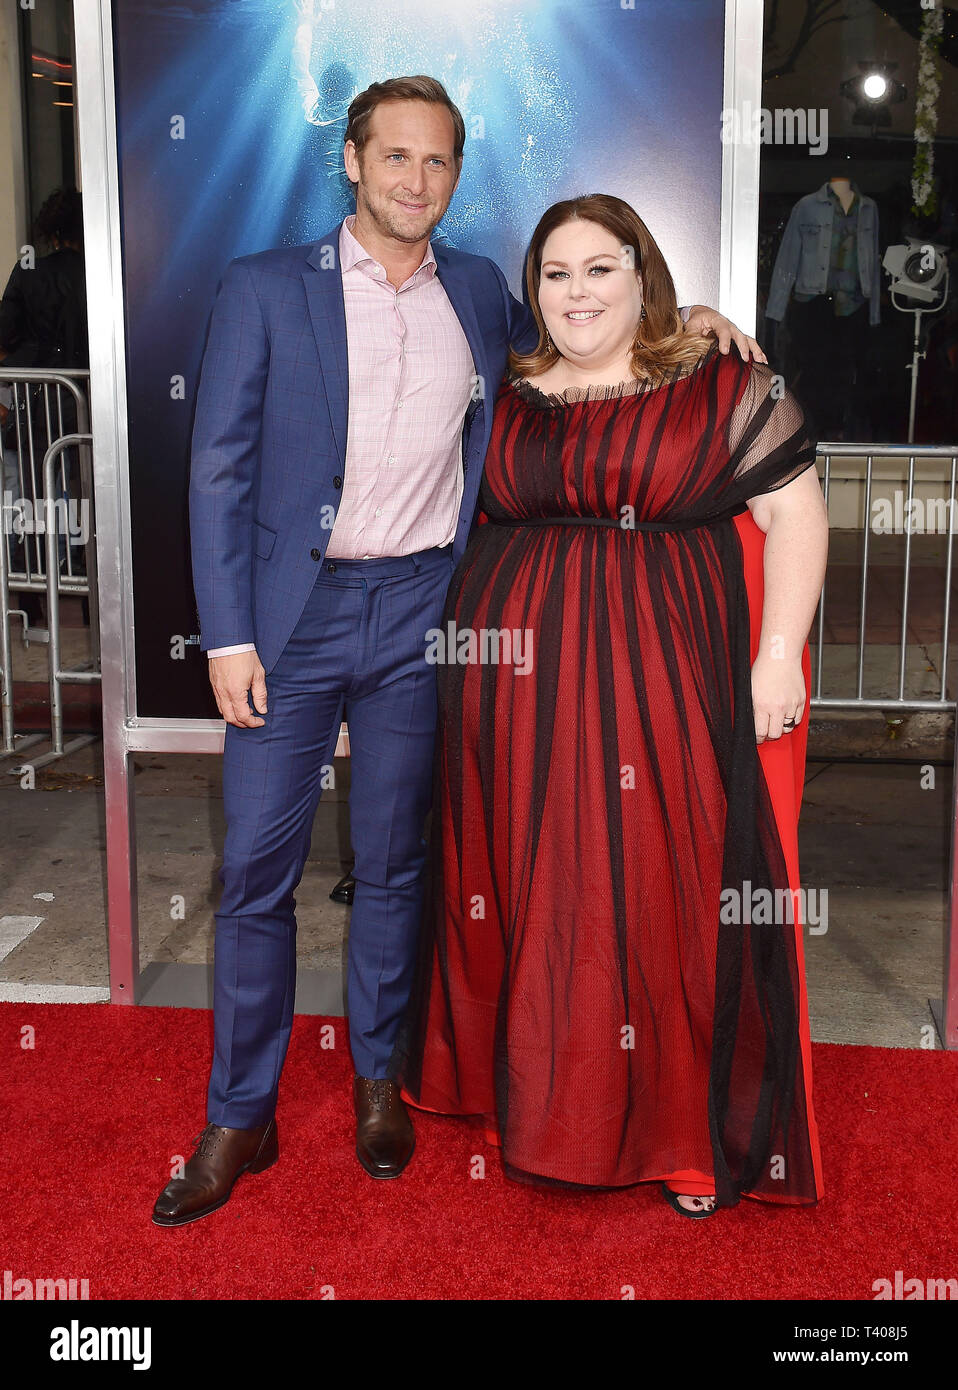 WESTWOOD, CA - APRIL 11: Josh Lucas, Chrissy Metz attends the premiere of 20th Century Fox's 'Breakthrough' at Westwood Regency Theater on April 11, 2019 in Los Angeles, California. Stock Photo